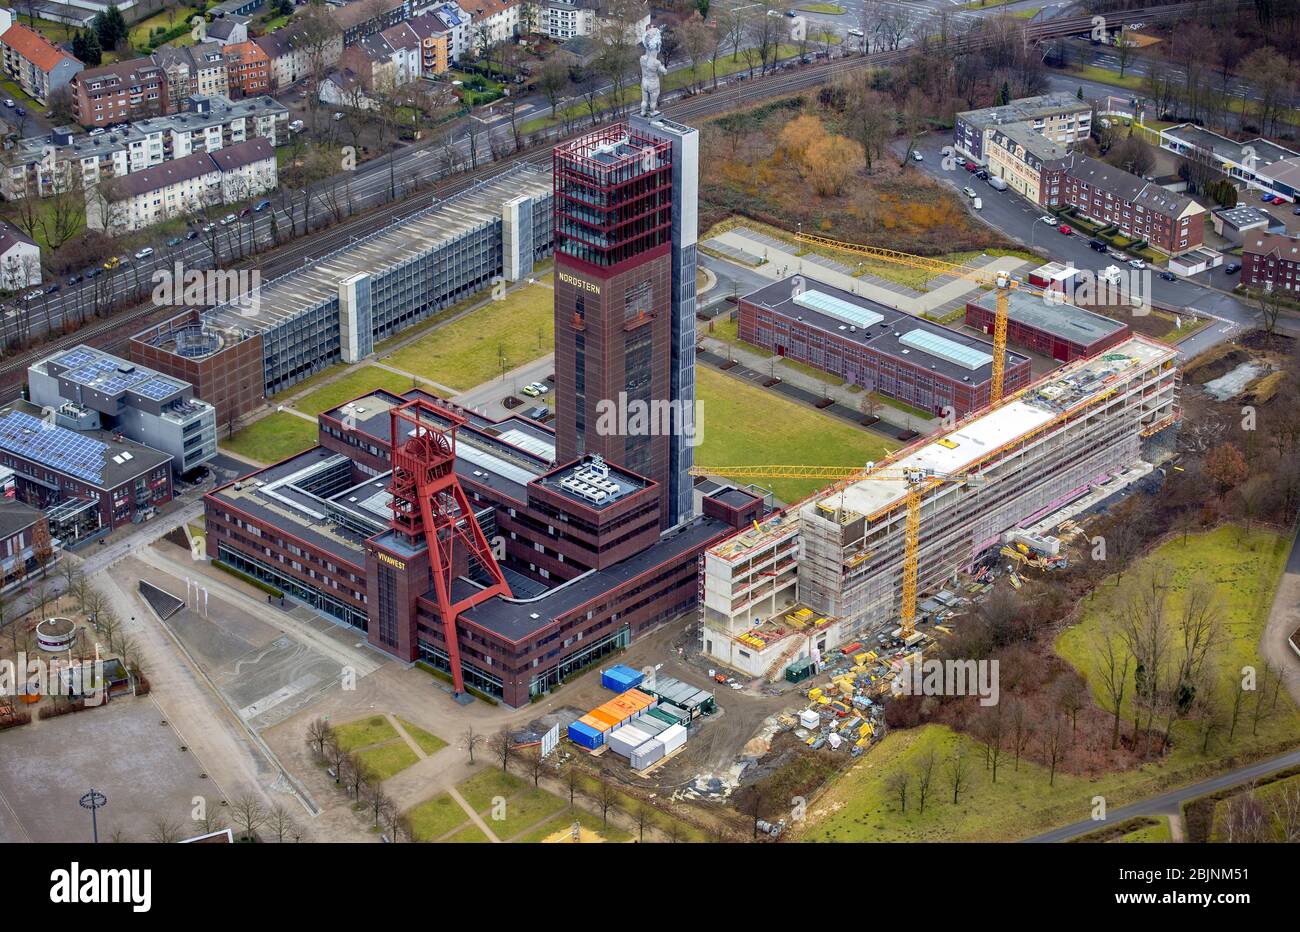 Office building of the administrative and business center of Vivawest Wohnen GmbH, headquartered in Nordsternpark on the area of former Nordstern colliery, 04.02.2017, aerial view, Germany, North Rhine-Westphalia, Ruhr Area, Gelsenkirchen Stock Photo